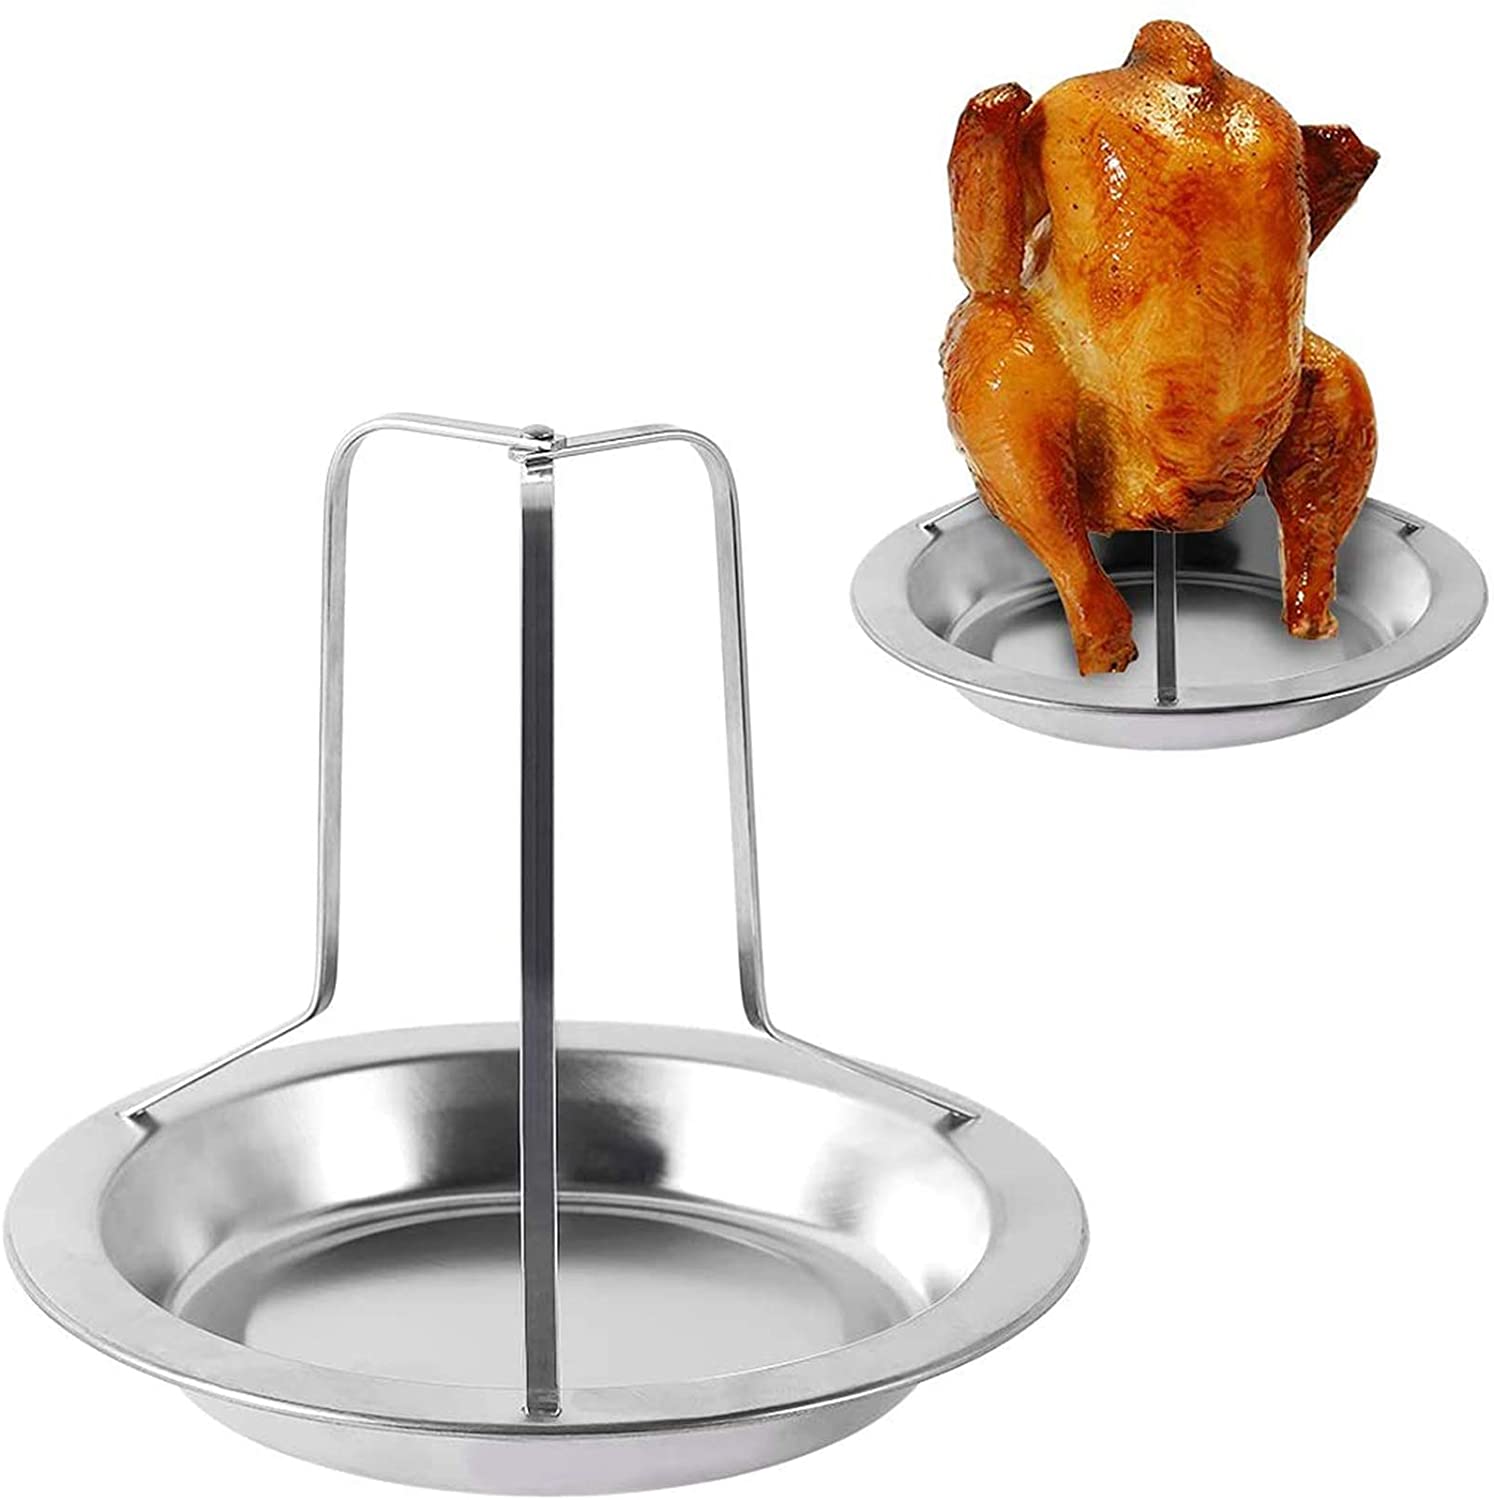 Amerteer Beer Can Chicken Holder - Folding Stainless Steel Vertical Poultry Turkey Chicken Roaster Rack with Roasting Pan for Oven or Barbecue Grill Charcoal Grill Smoker Grill - image 1 of 7